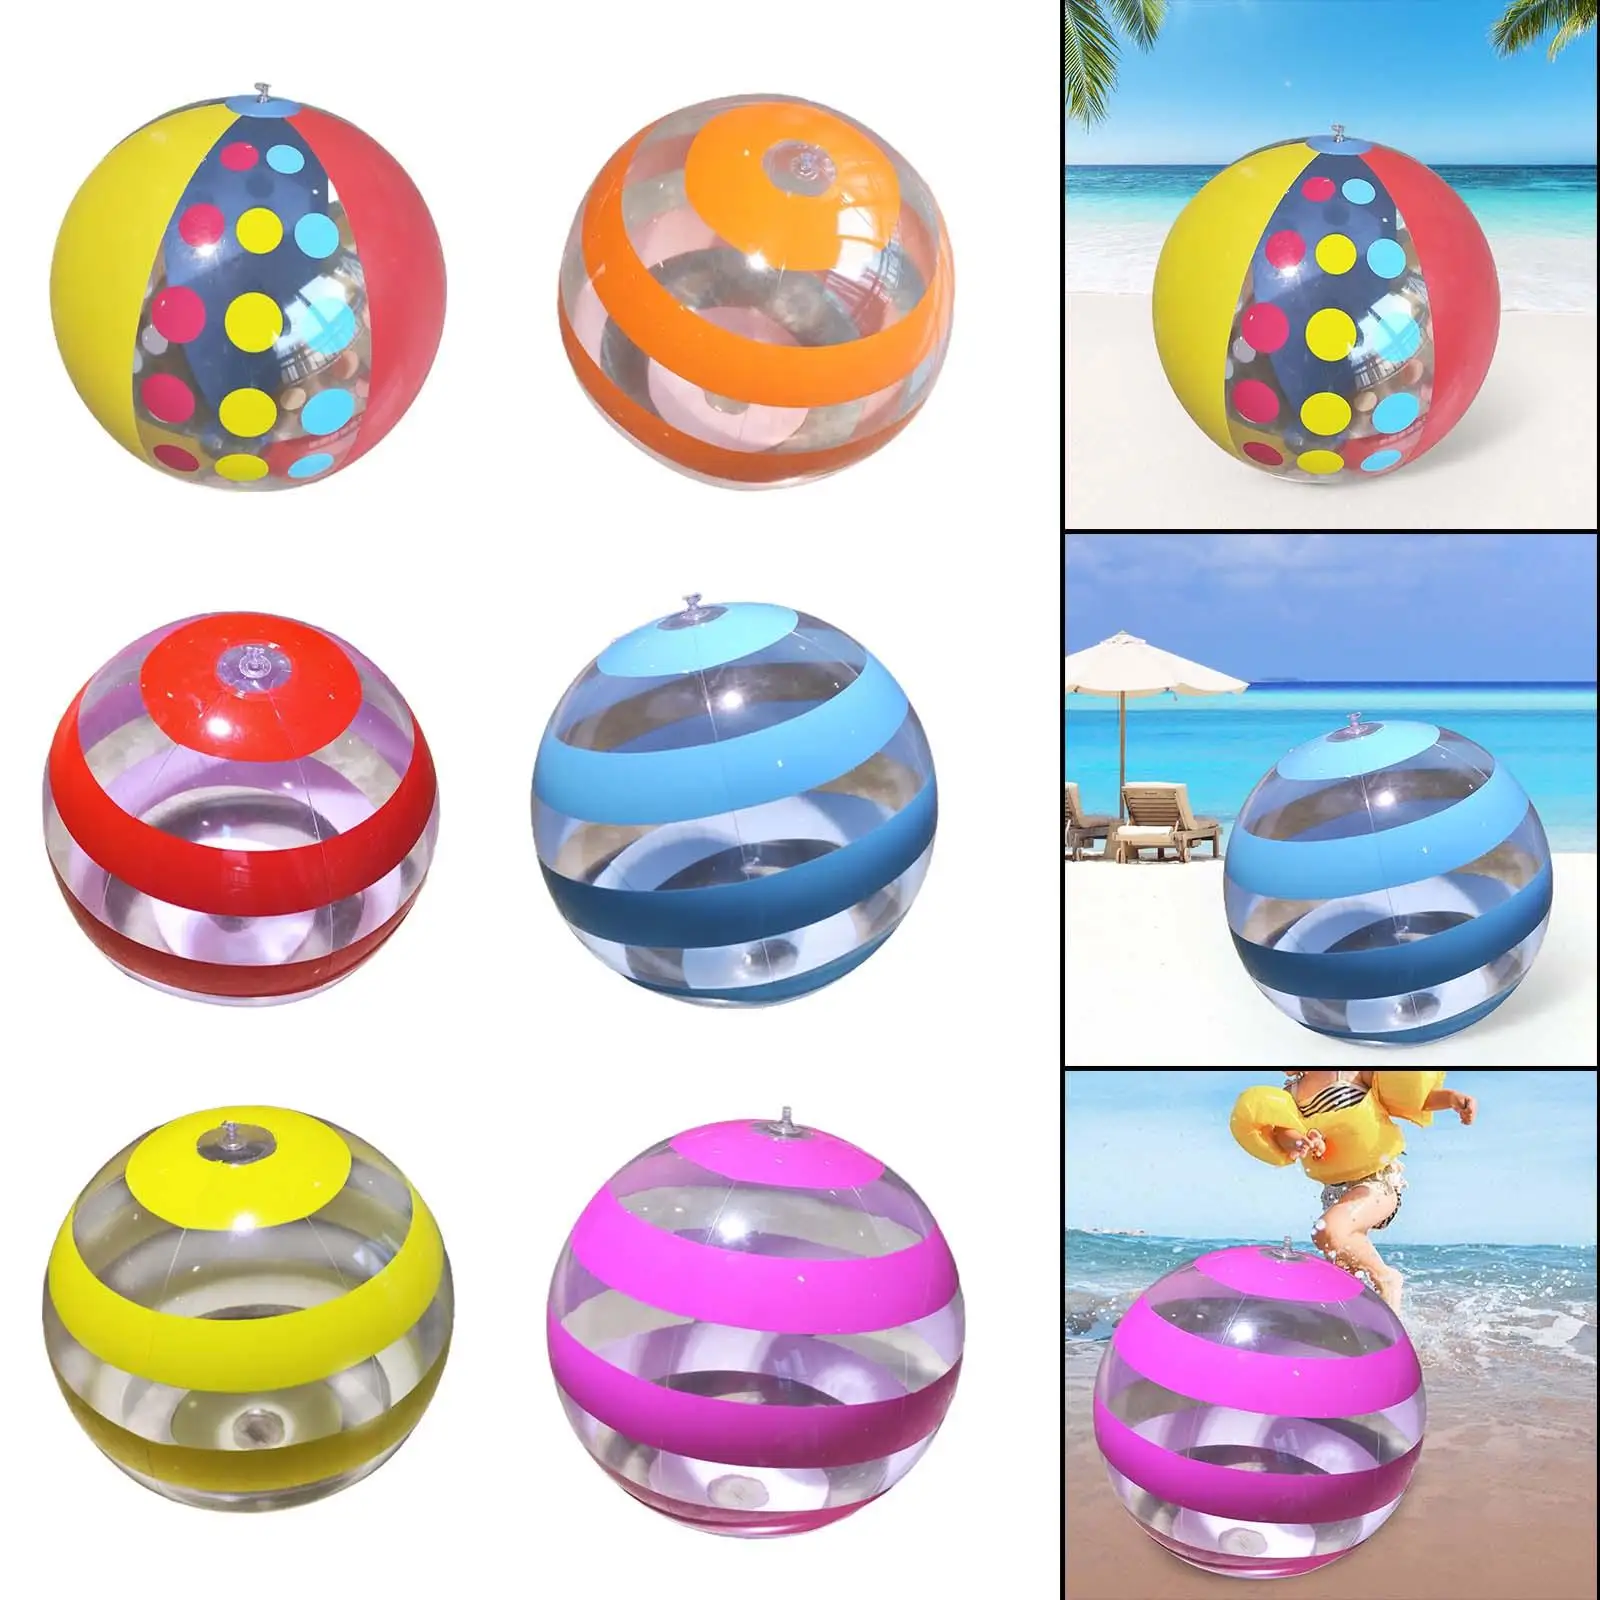 Swimming Pool Balls PVC Party Favor 15.75`` Pool Game Inflatable Pool Toys Summer Water Games for Beach Party Yard Lake Home